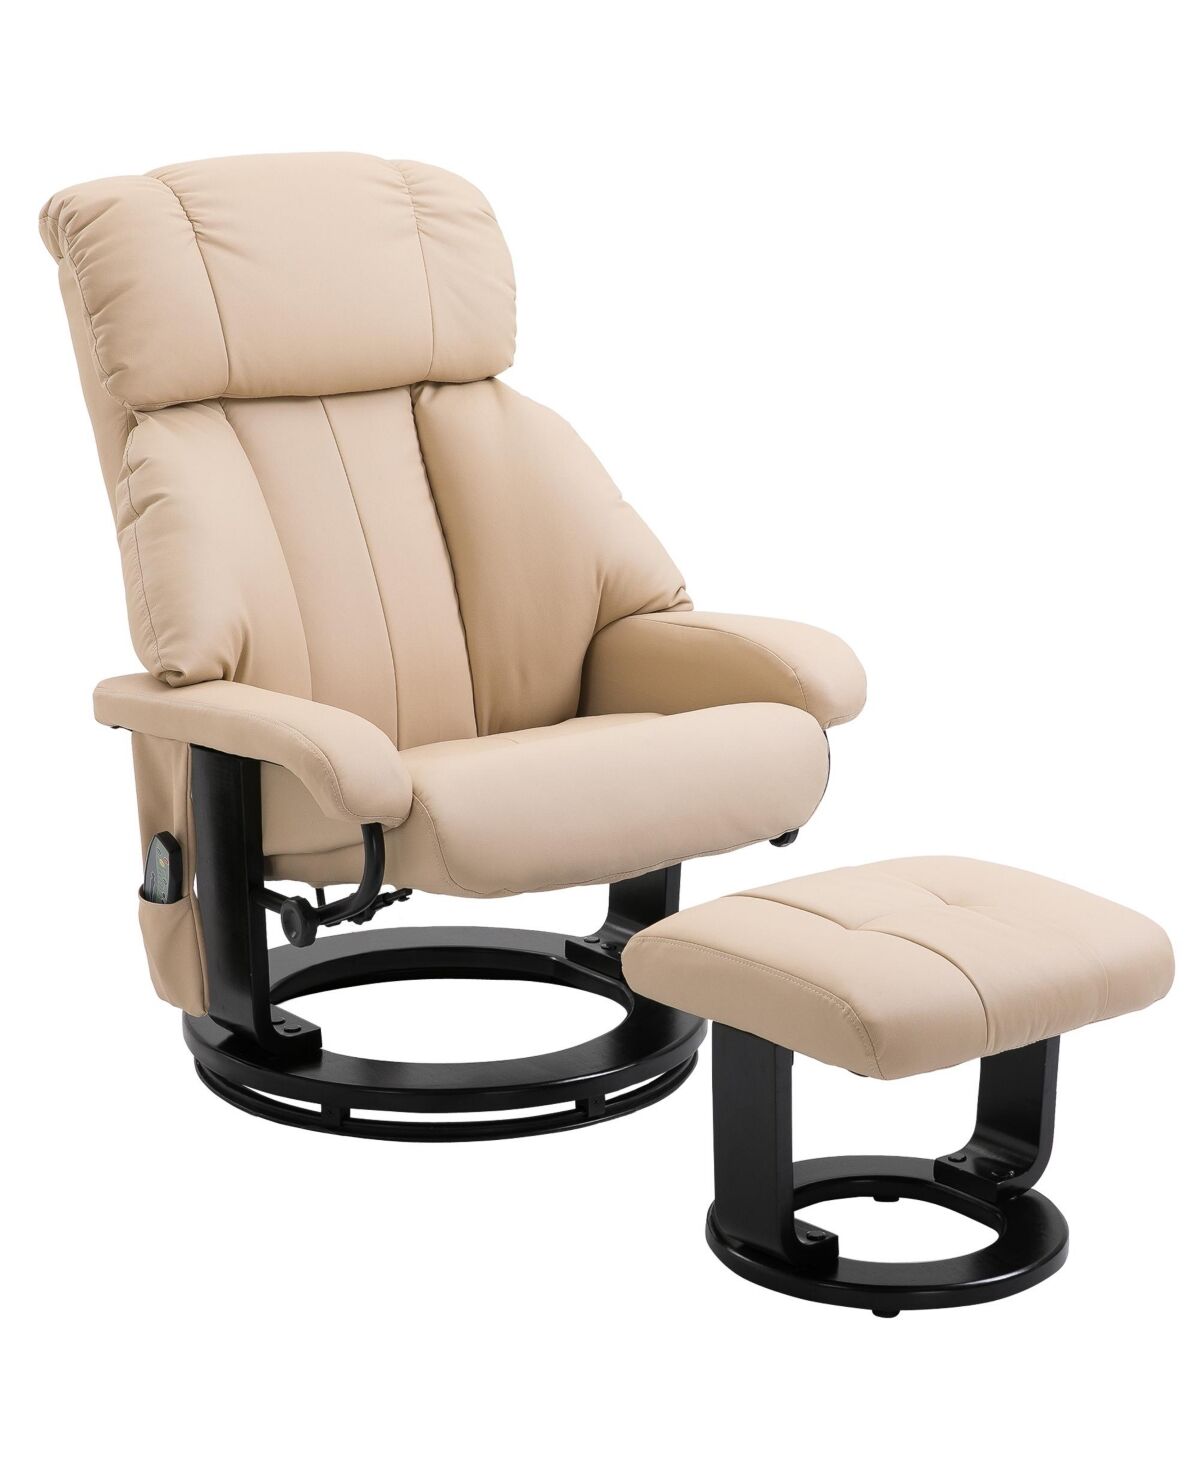 Homcom Massage Recliner Chair with Cushioned Ottoman and 10 Point Vibration - Beige